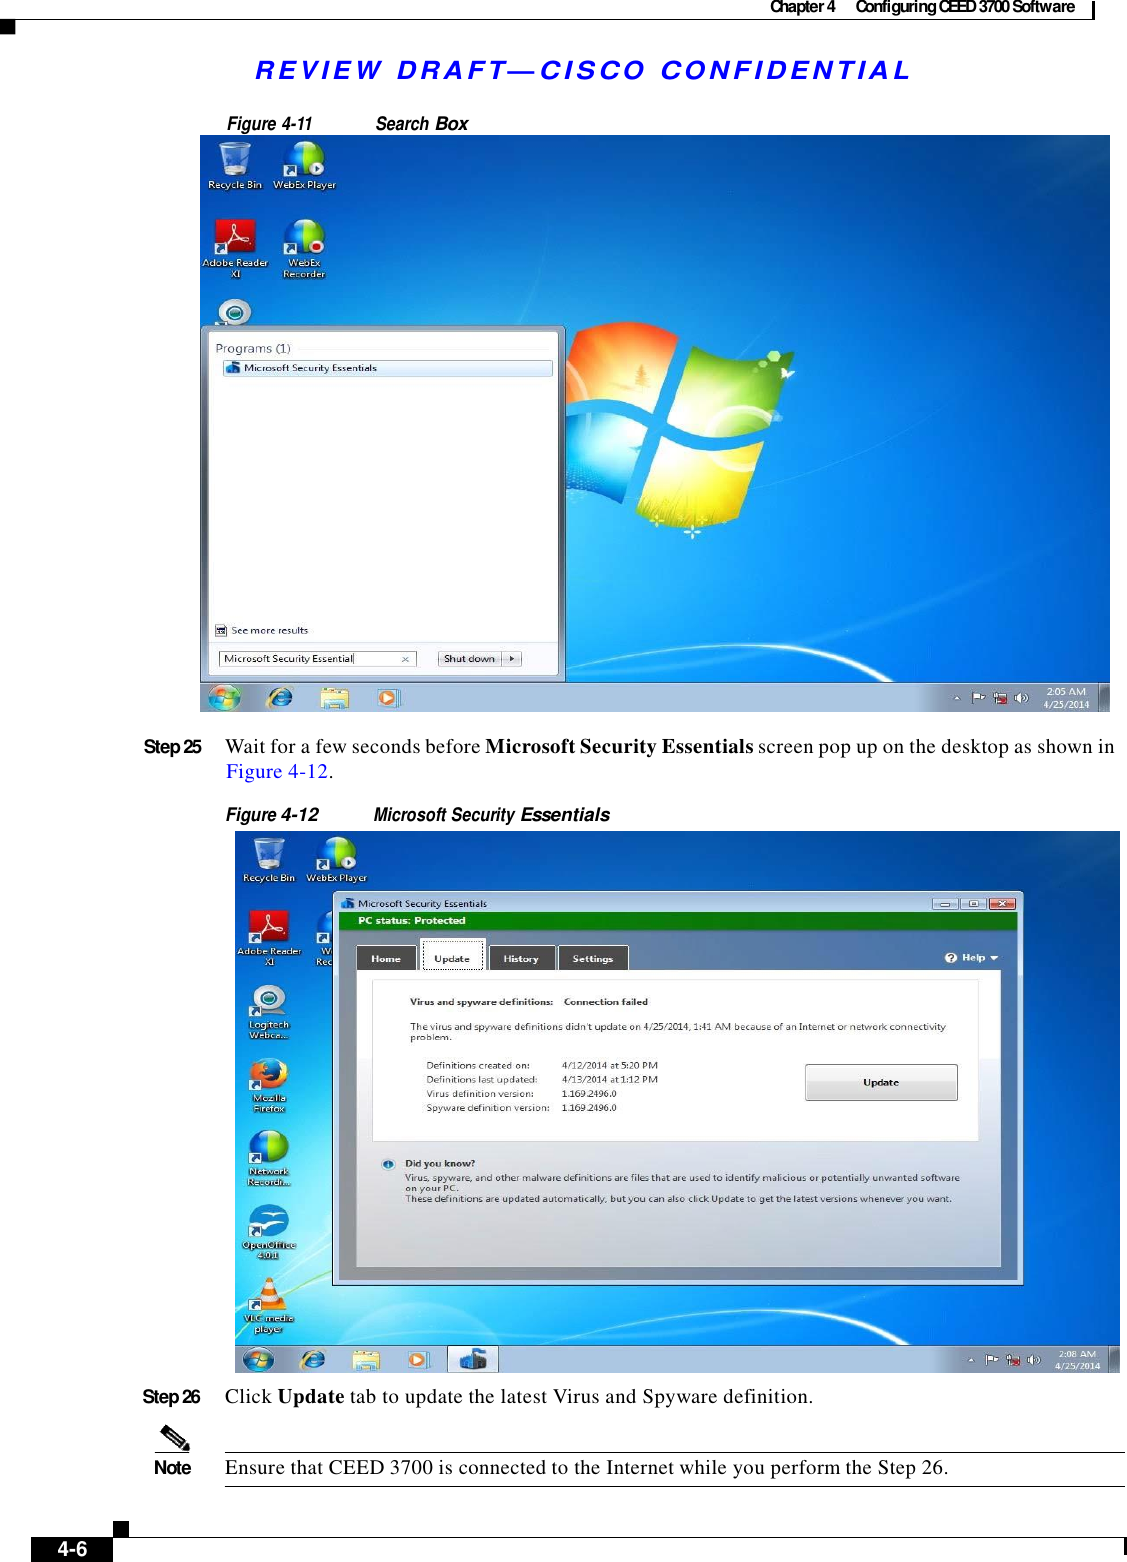 Chapter 4  Configuring CEED 3700 Software   R E V IE W  DRAFT— CISC O  C O N F ID E NT IA L   Figure 4-11 Search Box   Step 25  Wait for a few seconds before Microsoft Security Essentials screen pop up on the desktop as shown in Figure 4-12.  Figure 4-12 Microsoft Security Essentials   Step 26  Click Update tab to update the latest Virus and Spyware definition.   Note  Ensure that CEED 3700 is connected to the Internet while you perform the Step 26.        4-6   